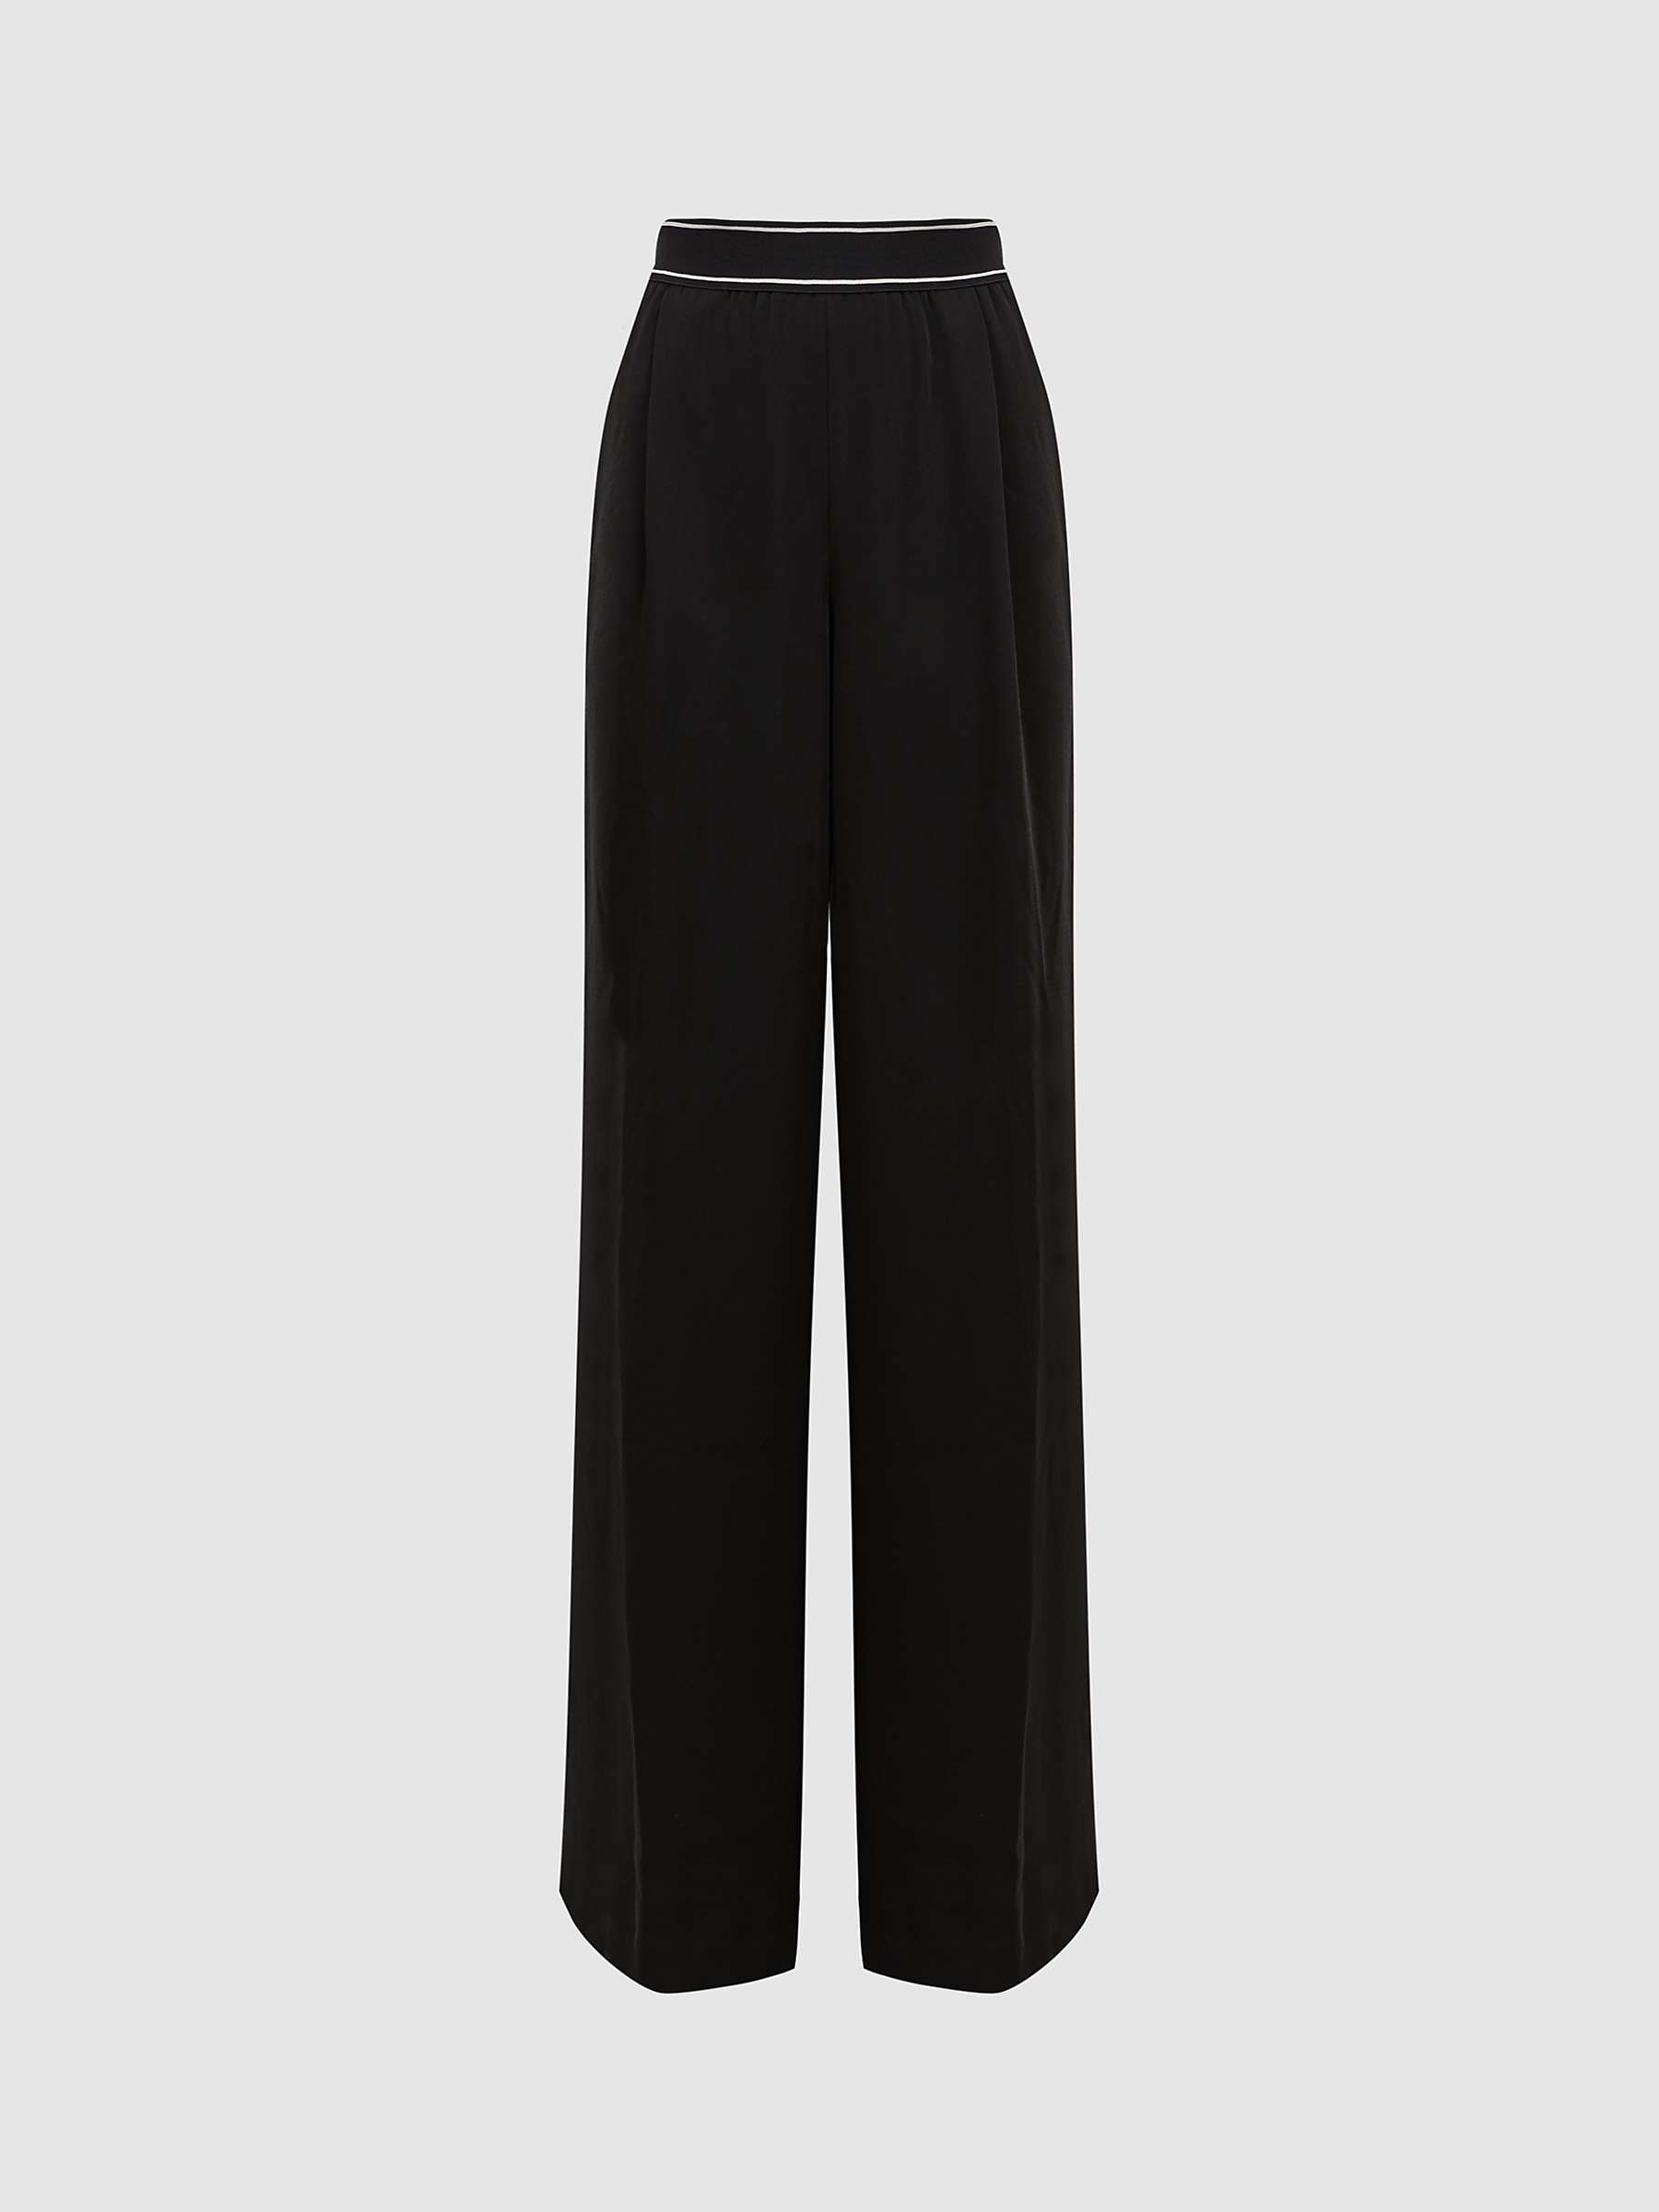 Buy Reiss Abigail Stripe Waistband Trousers Online at johnlewis.com